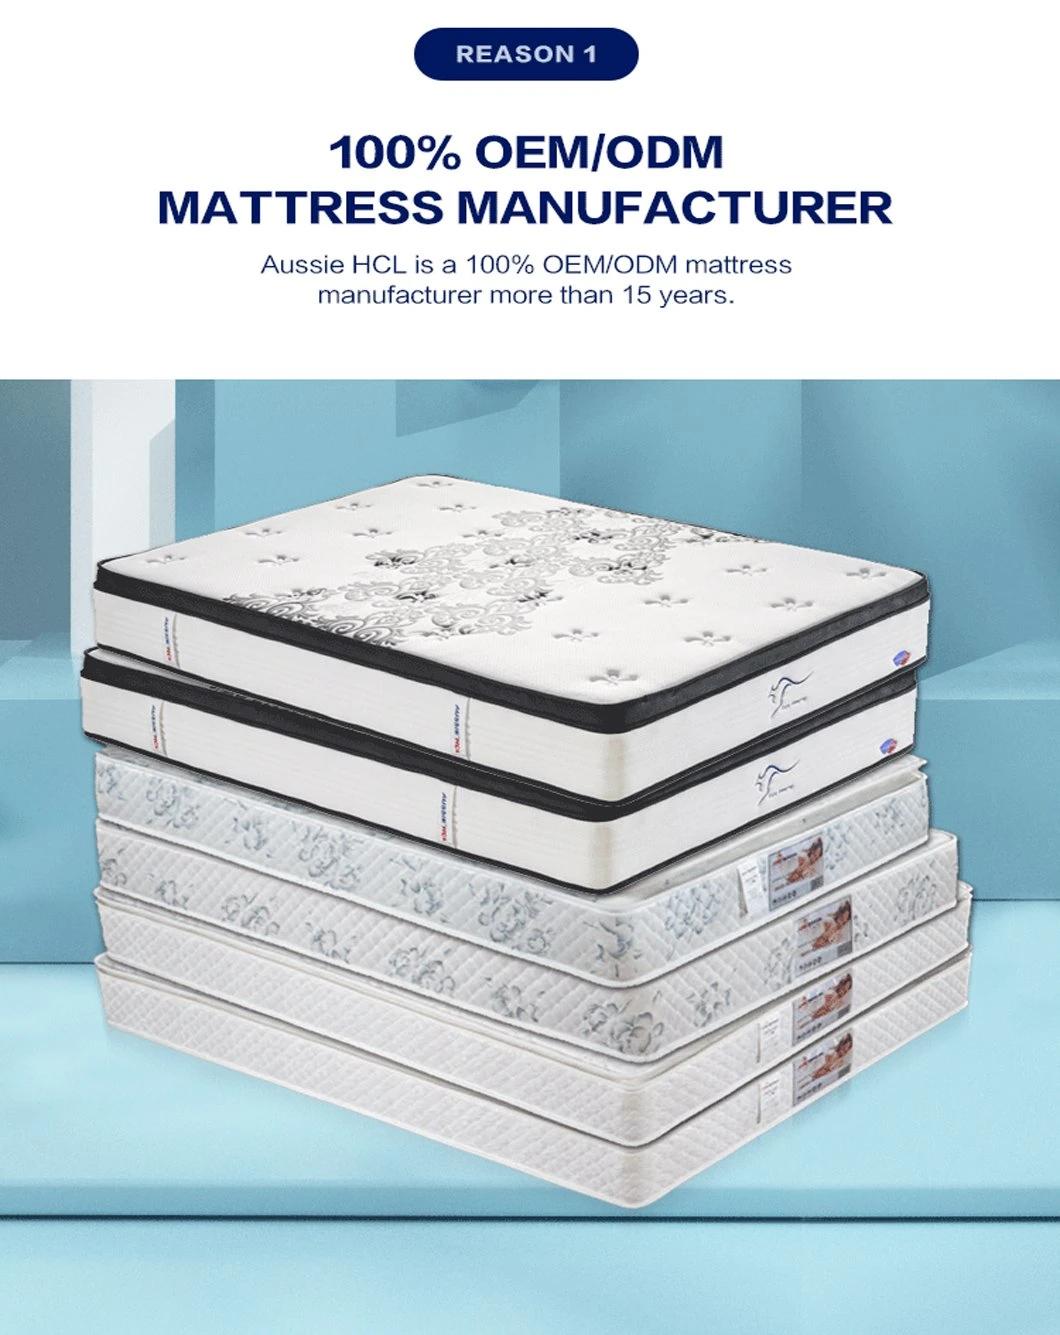 Quality Sleep Well Innerspring Mattresses Pocket Coil Spring Hybrid Memory Foam Full Inch Bed Mattress Rolled in Box